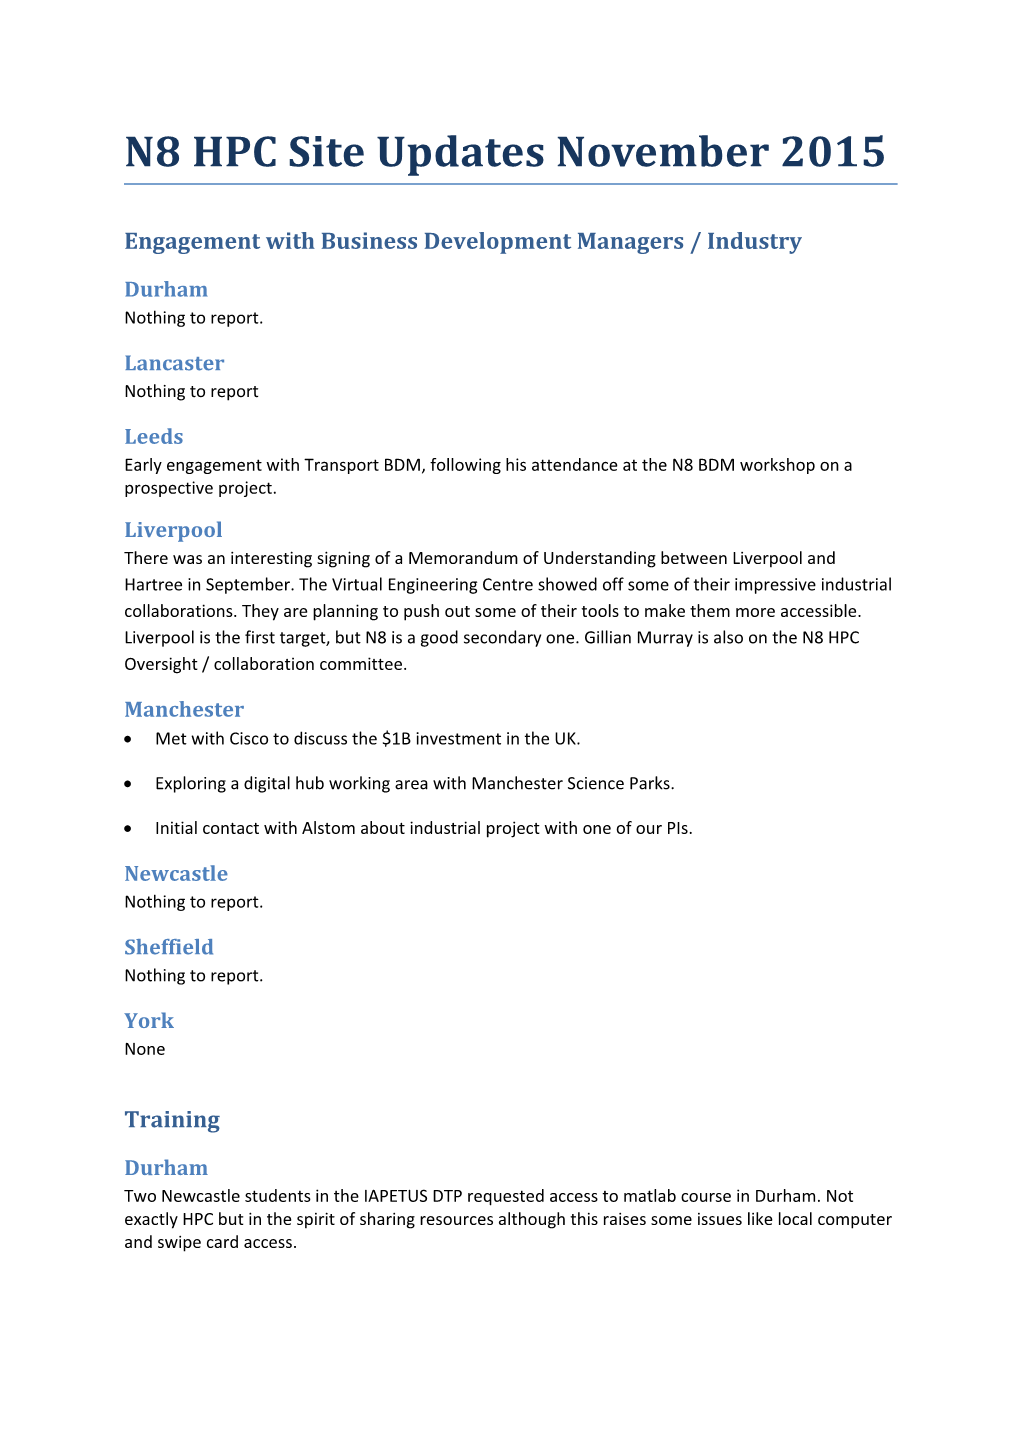 Engagement with Business Development Managers / Industry